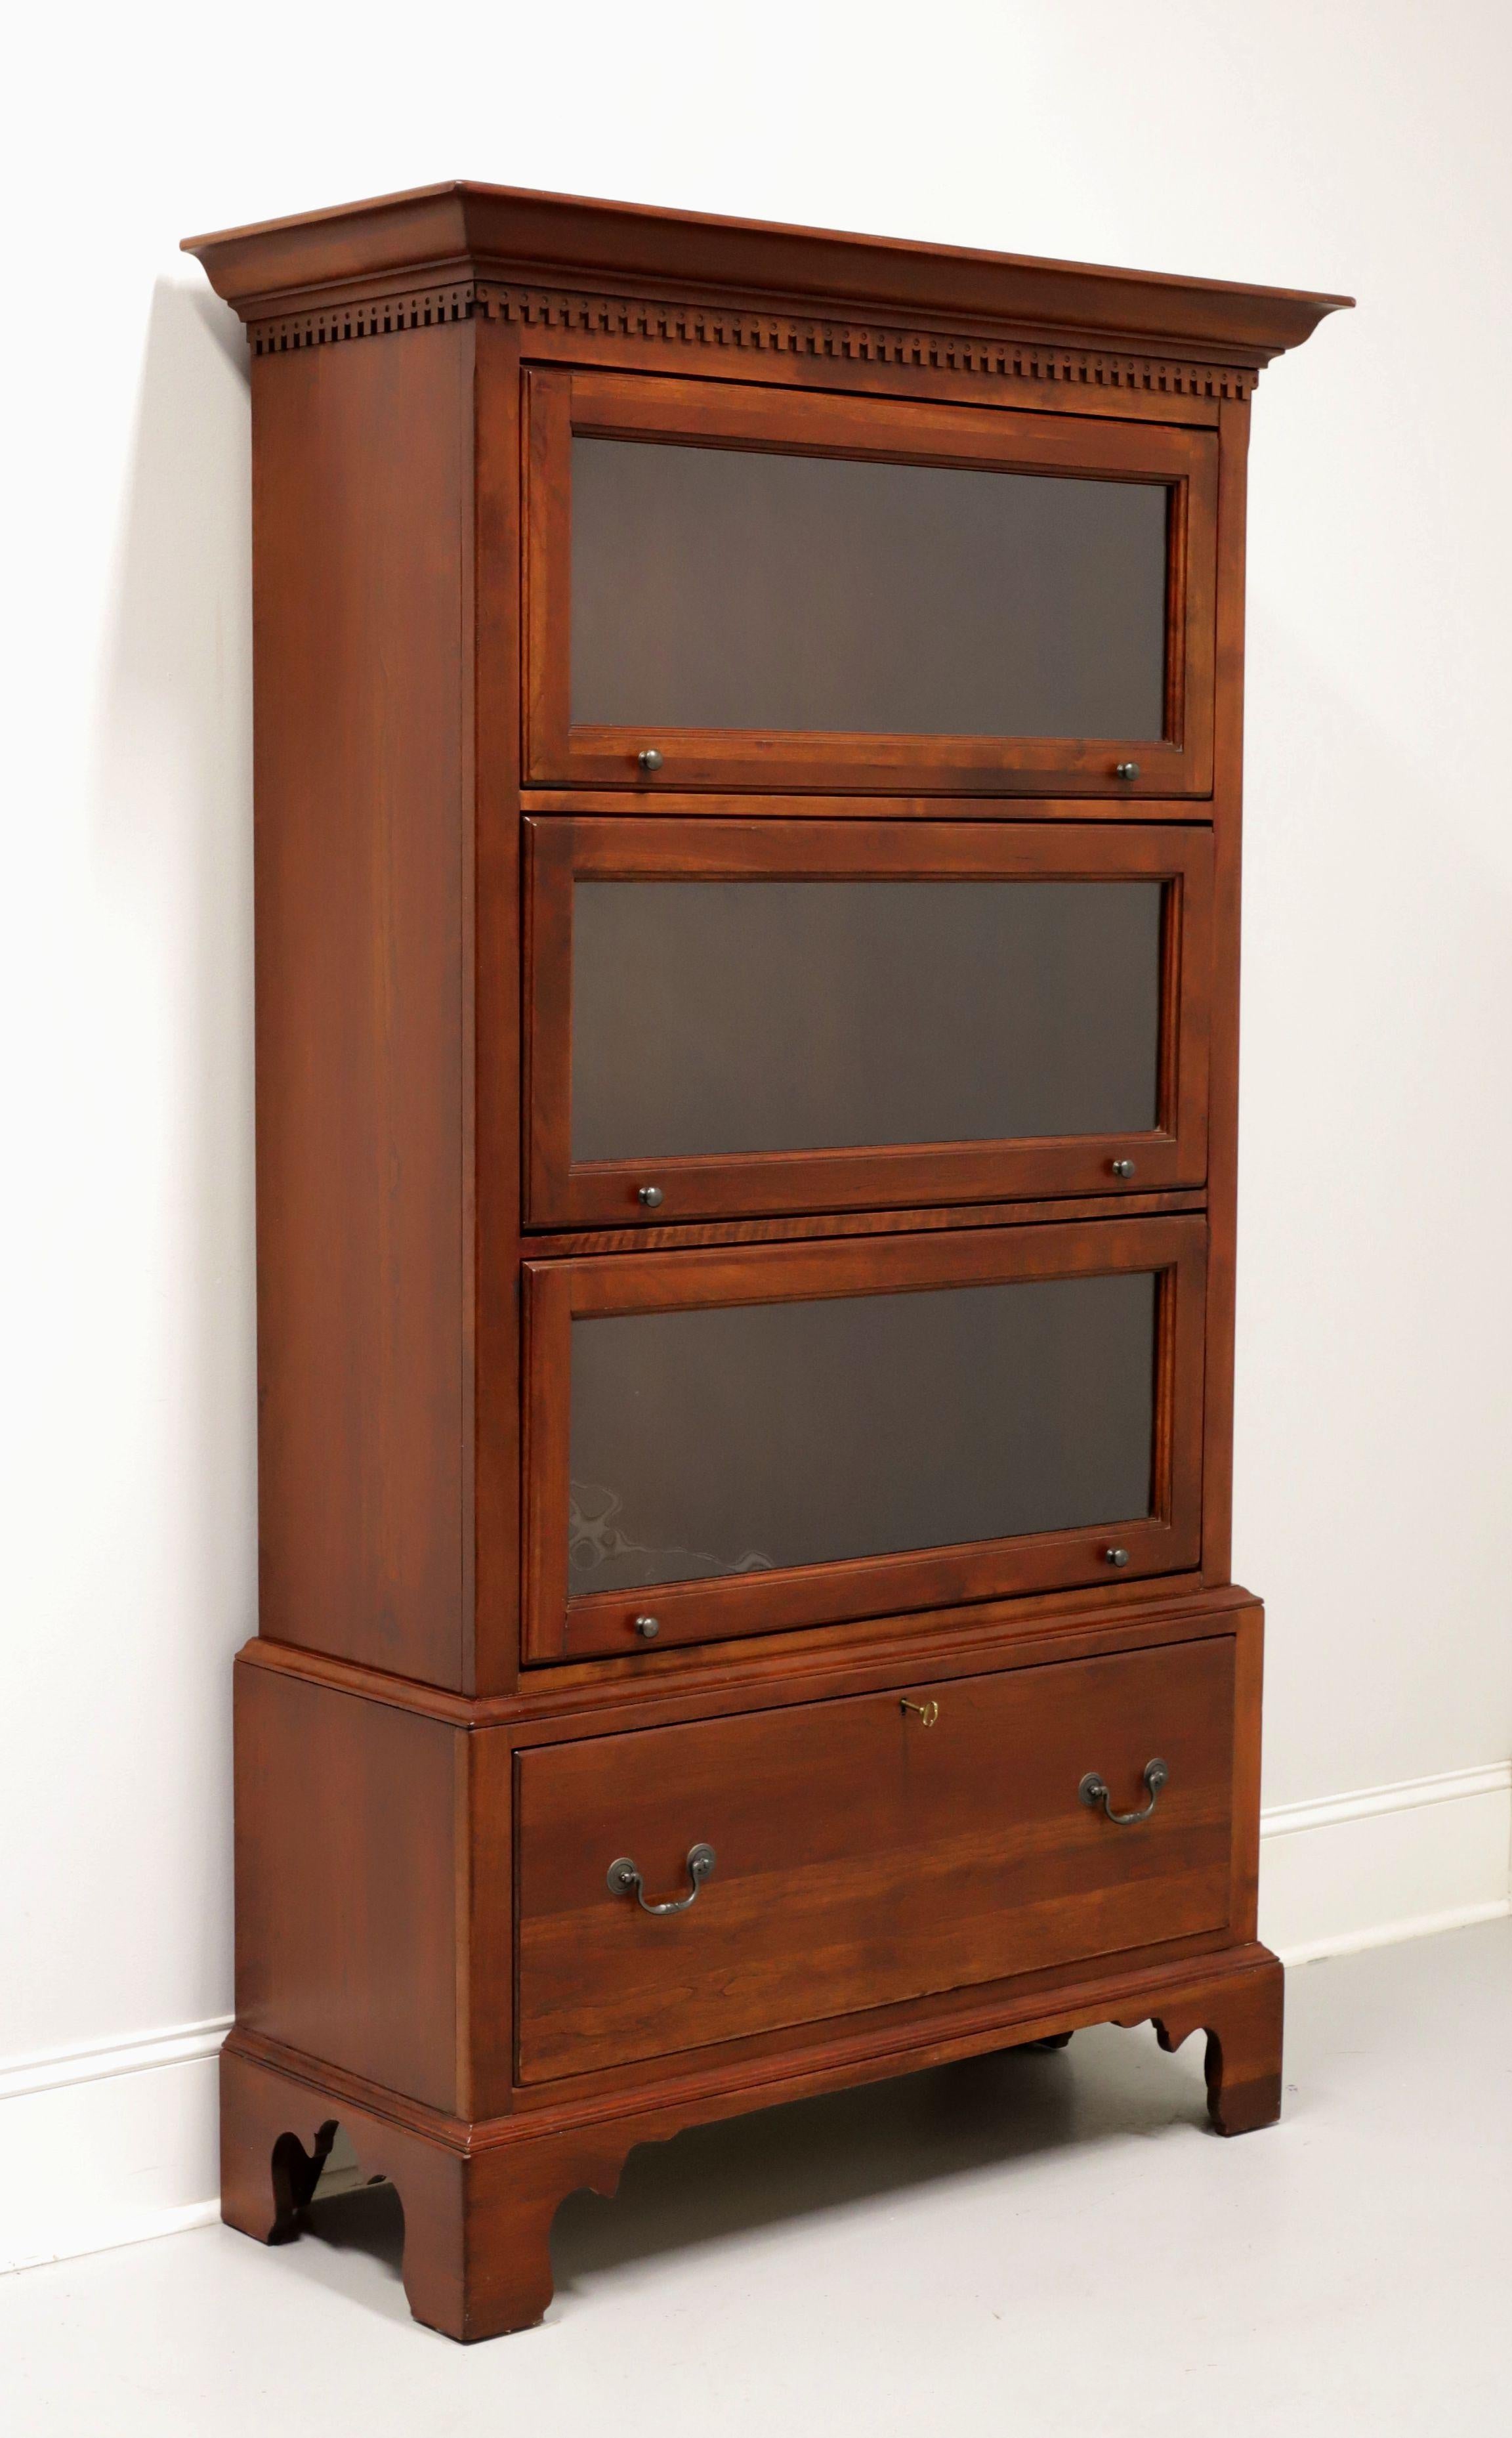 LEXINGTON Bob Timberlake Solid Cherry Chippendale Barrister Bookcase 5